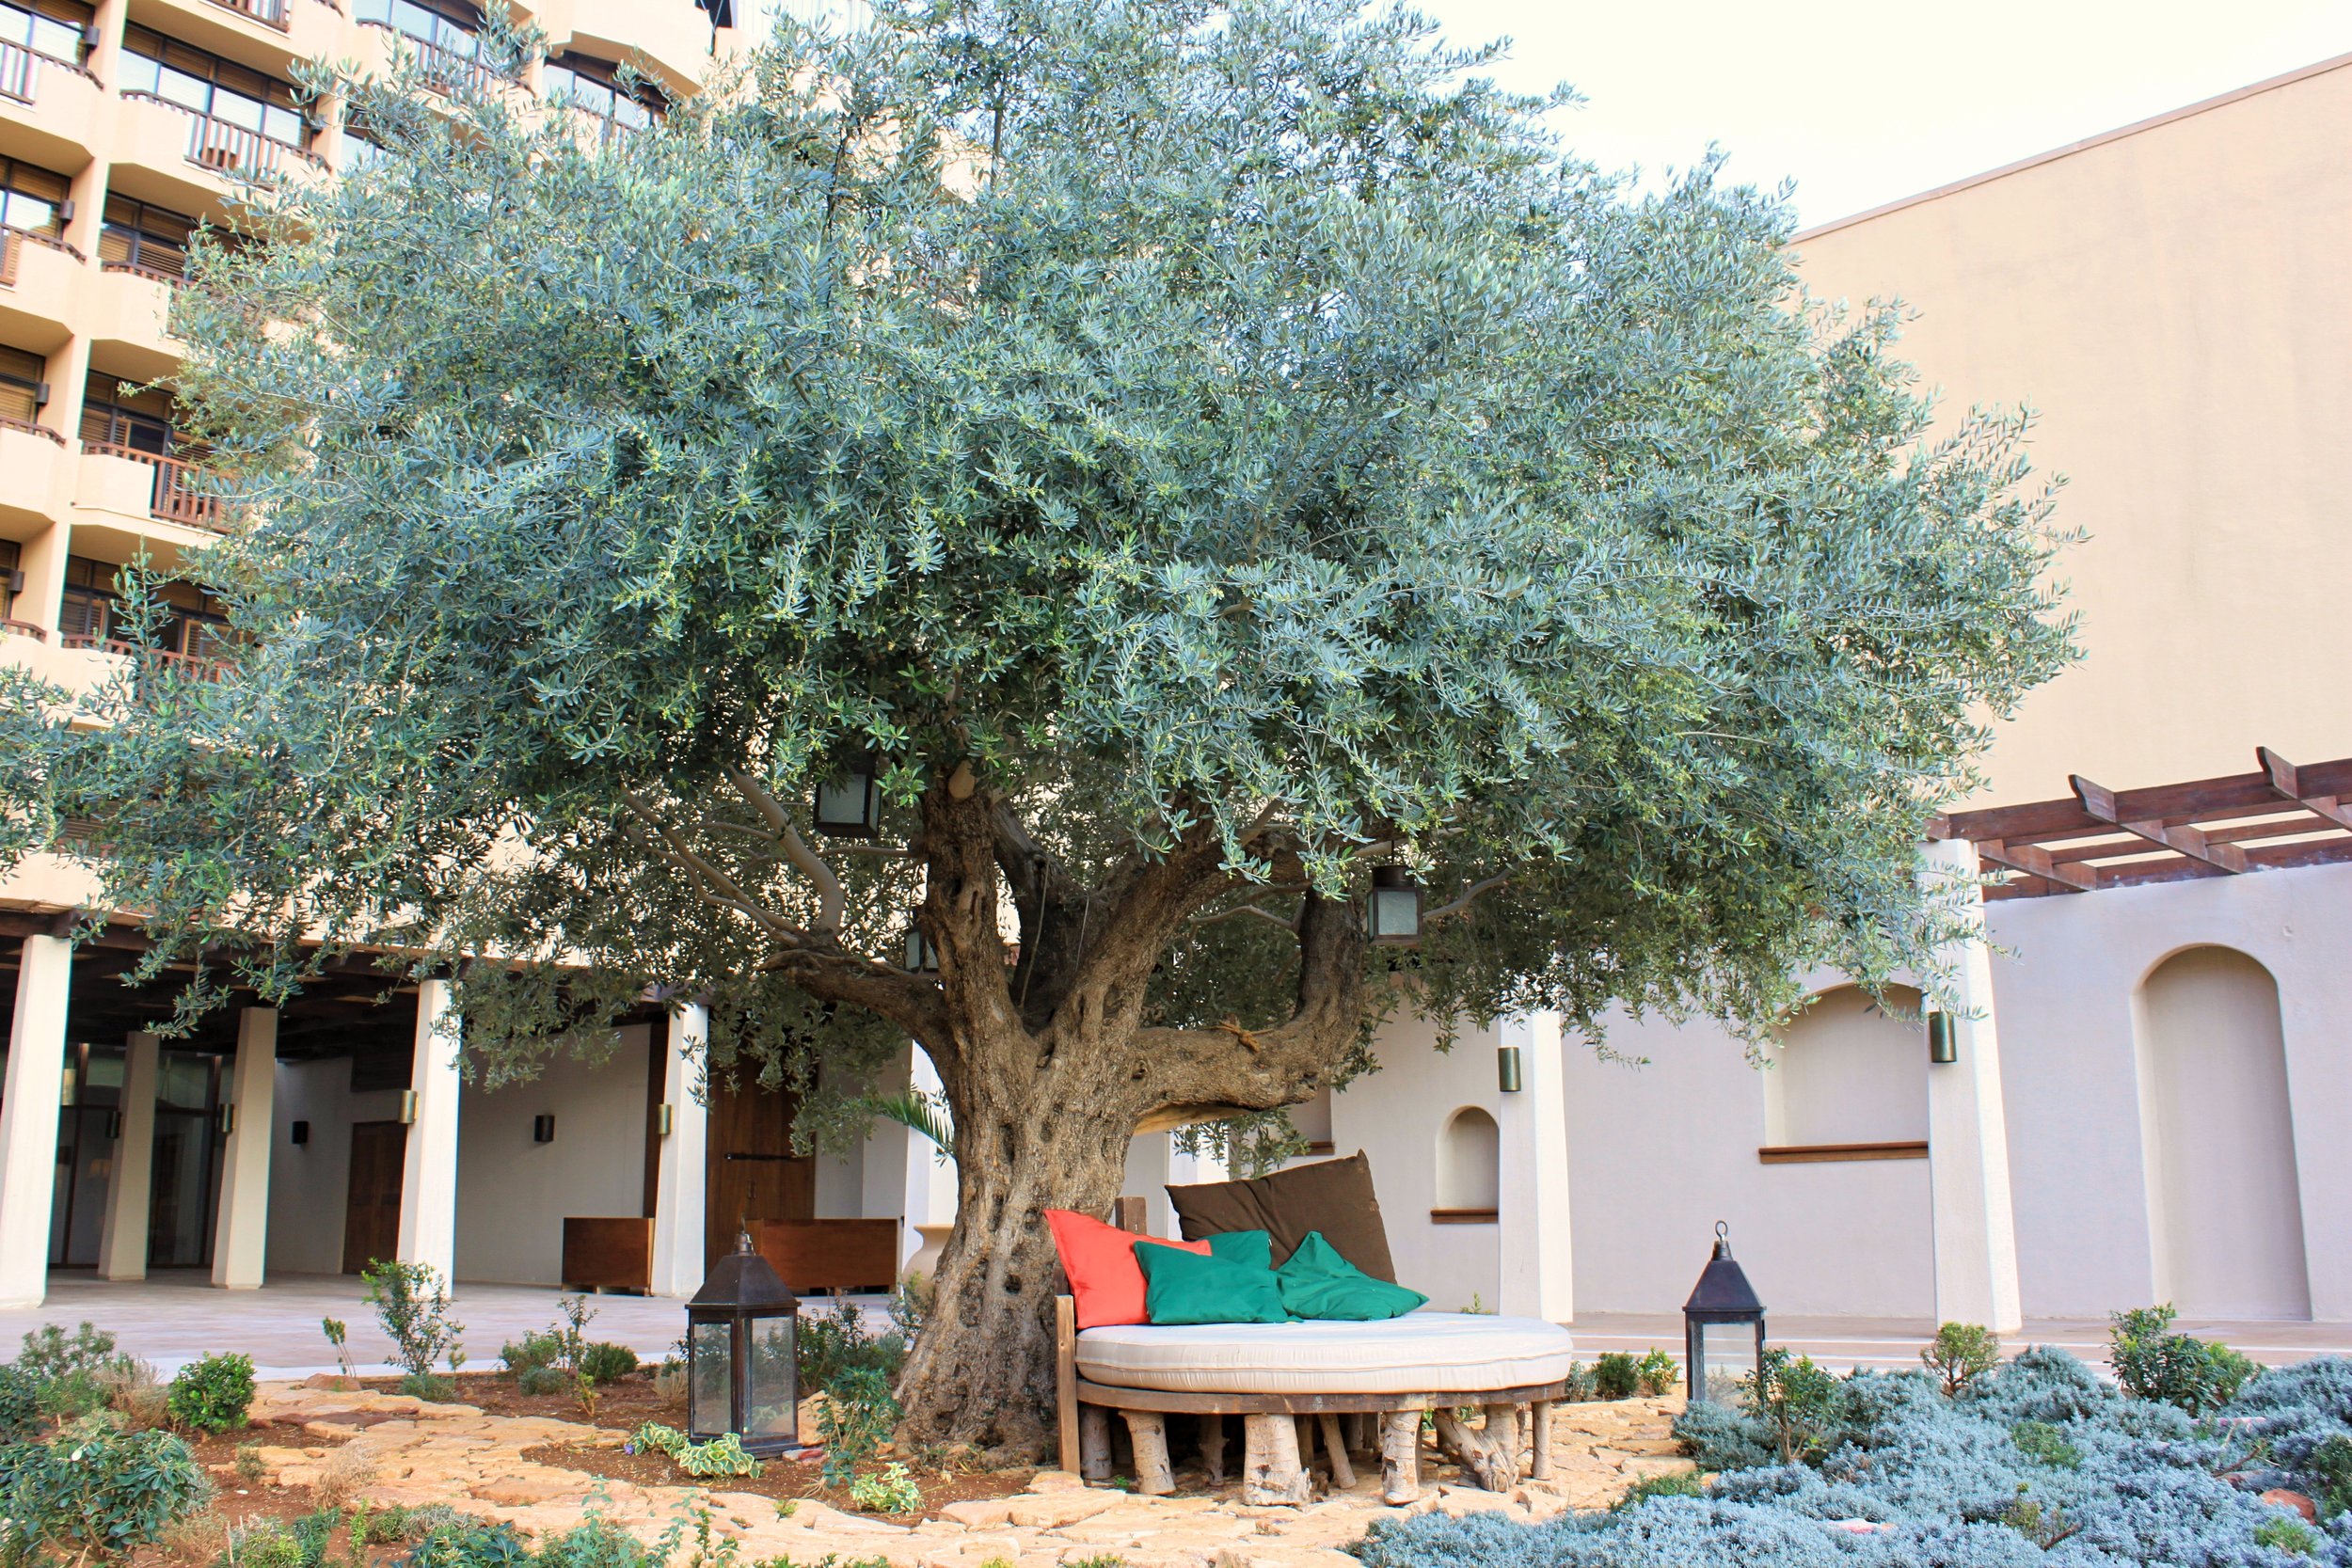 The central tree at the Ma’in Hot Springs Resort &amp; Spa in Jordan